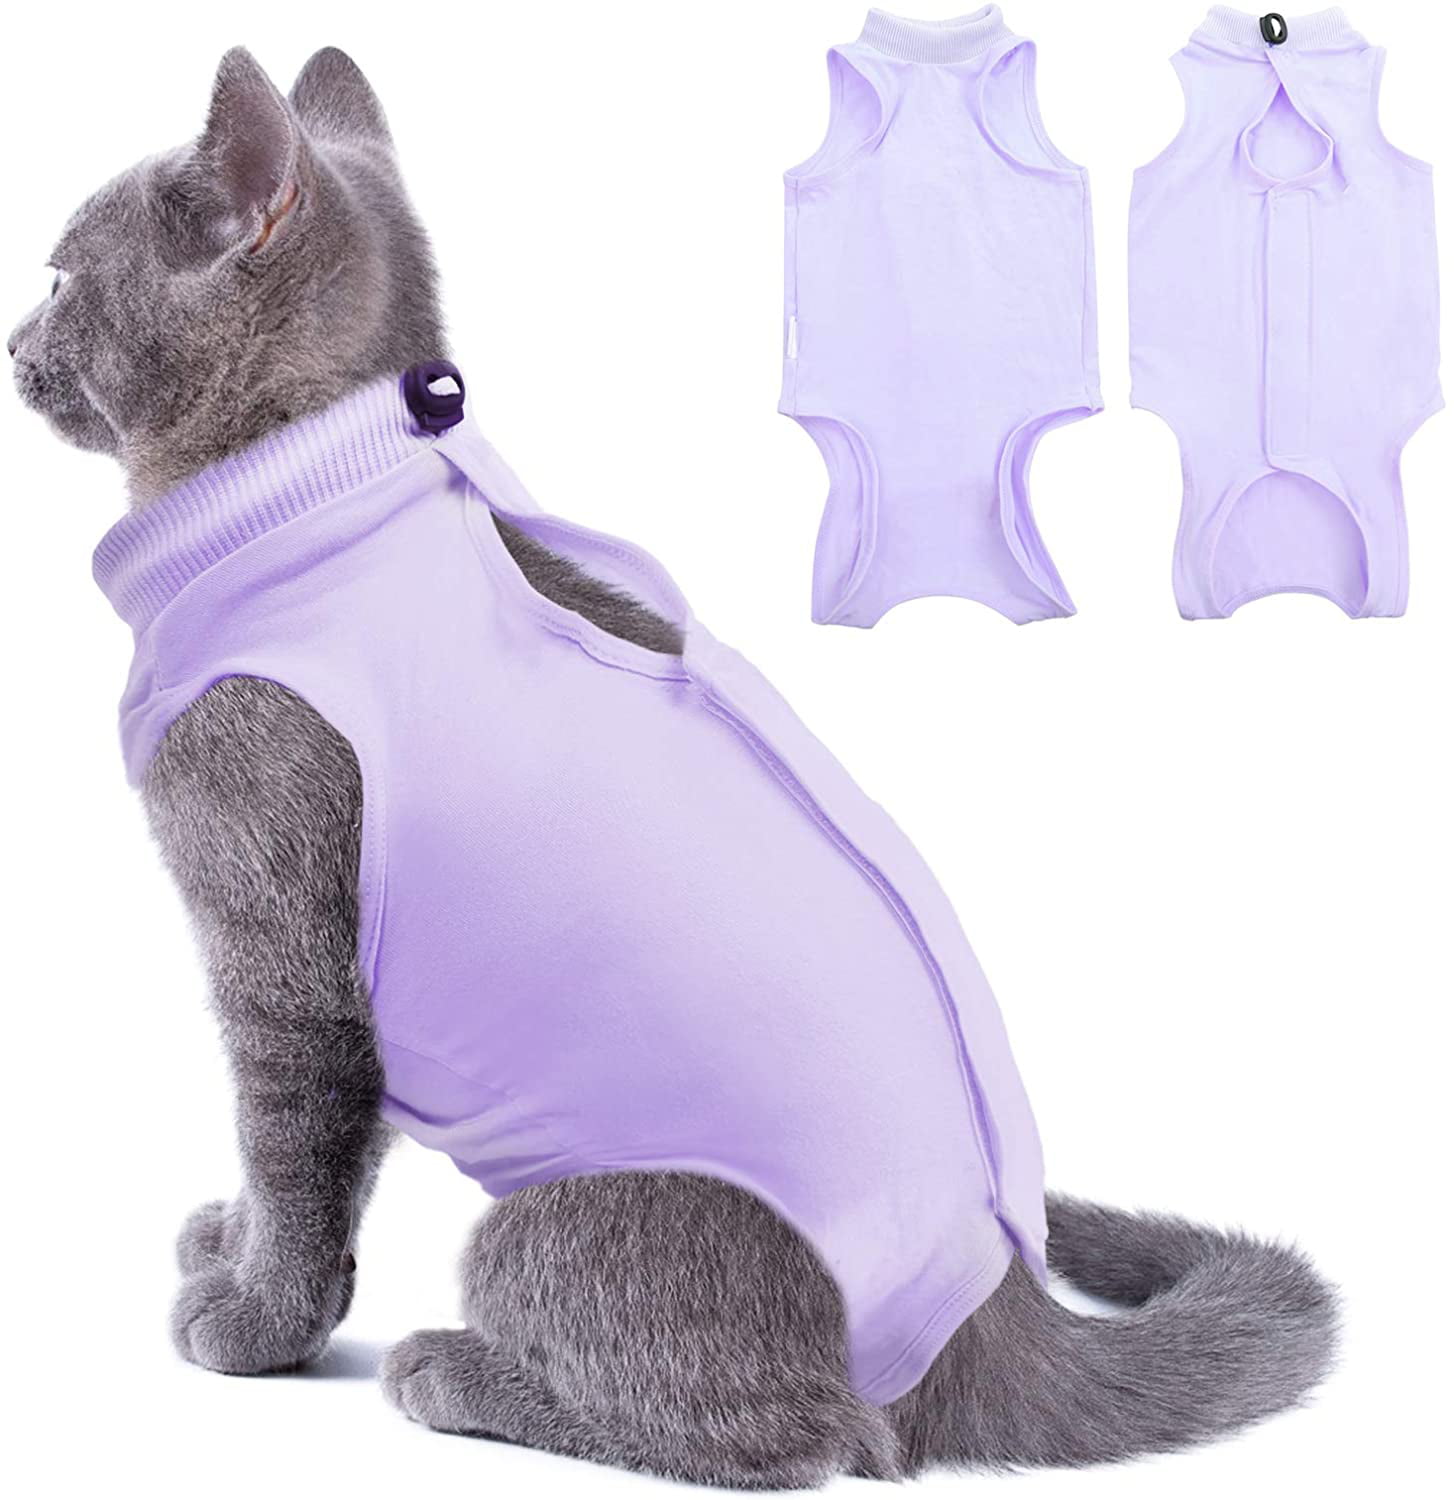 LIANZIMAU Cat Surgery Recovery Suit for Surgical Abdominal Wounds Home Indoor Pet Clothing E-Collar Alternative for Cats After Sterilization Pajama Suit 